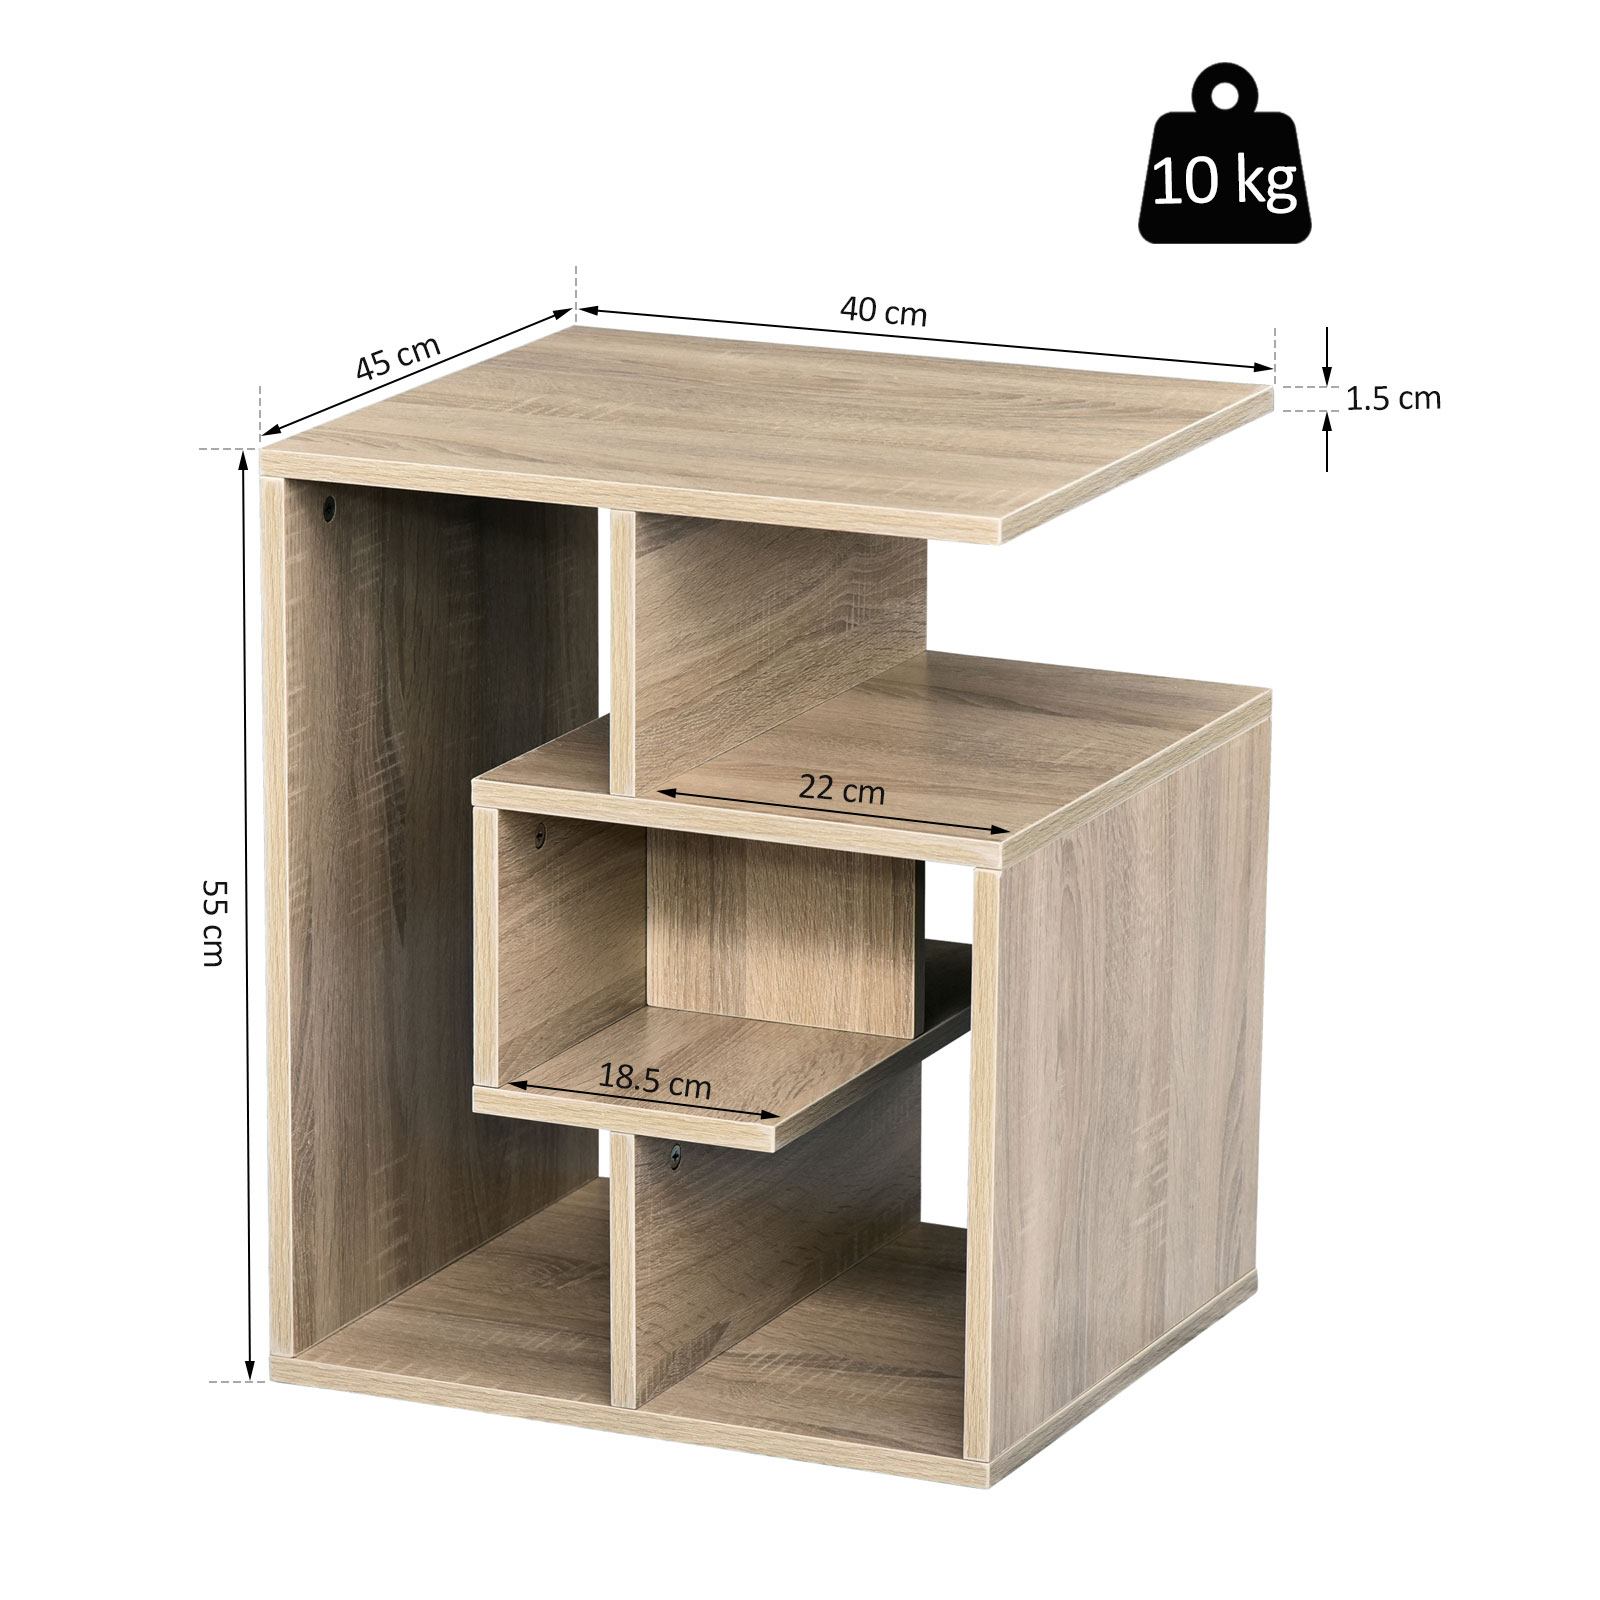 HOMCOM Side Table, 3 Tier End Table with Open Storage Shelves, Living Room Coffee Table Organiser Unit, Oak Colour